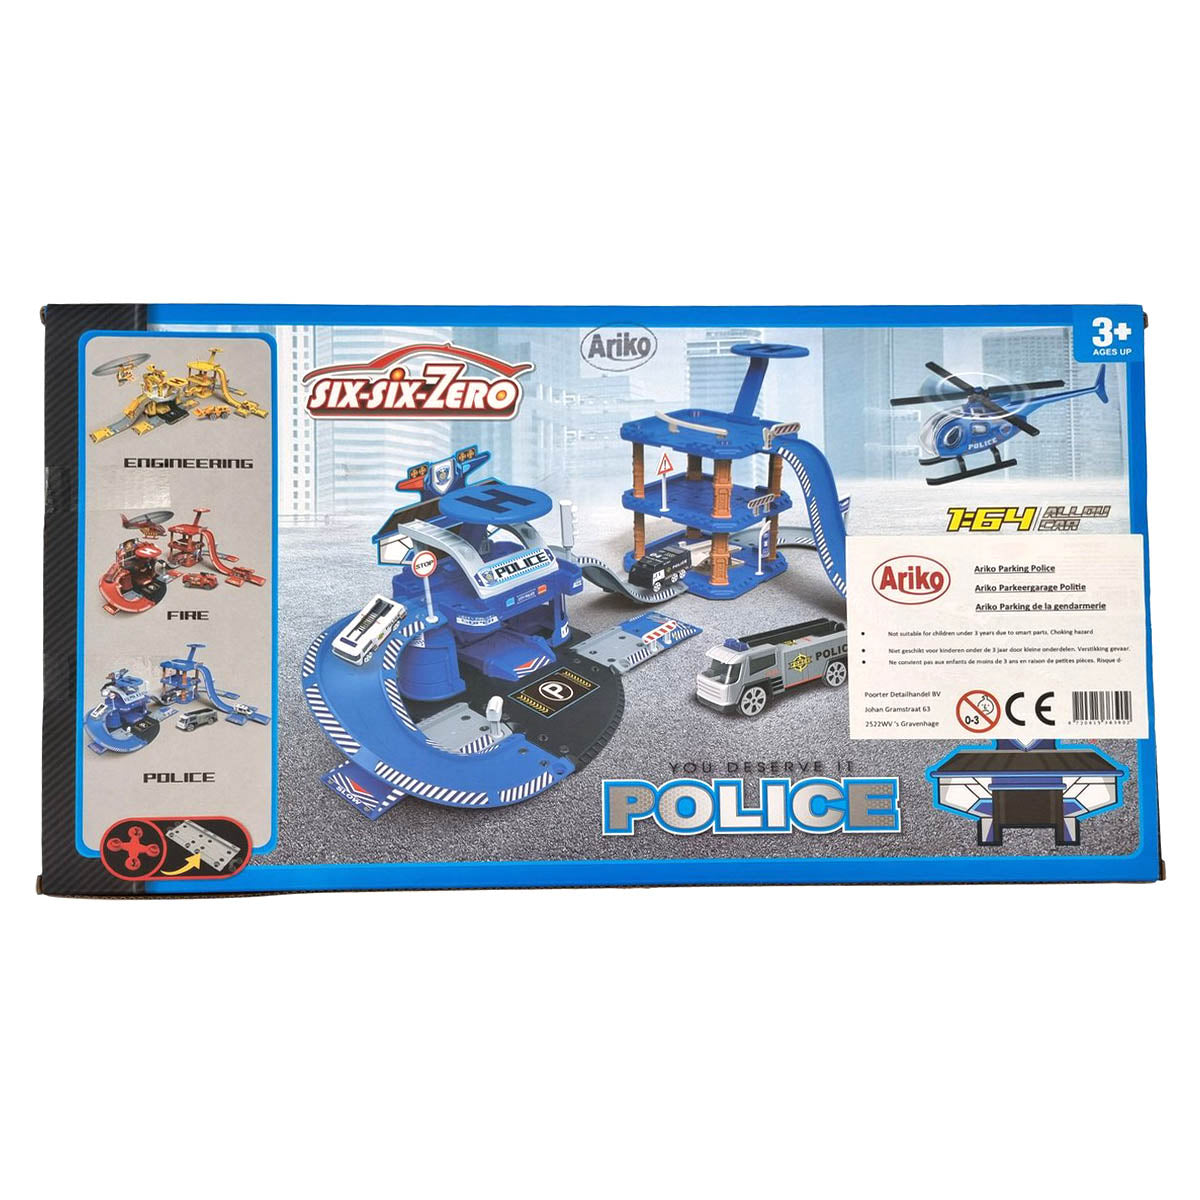 <tc>Ariko</tc> Police car park - With helicopter, water spray car and other various cool cars - 1:64